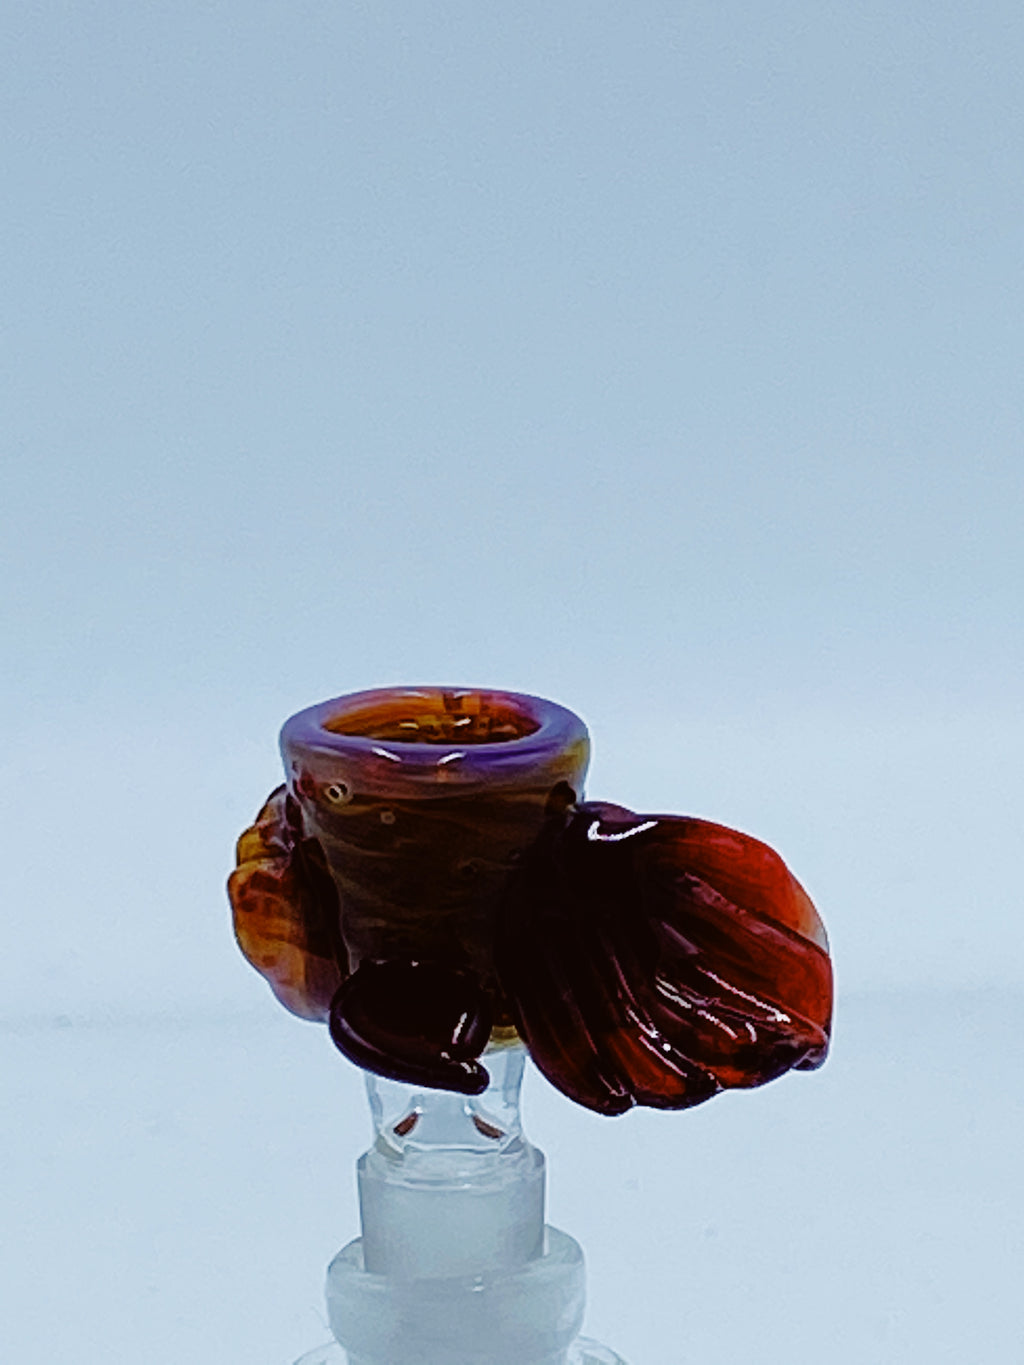 Tear E 14mm Monster Bowl Type 5 - Smoke Country - Land of the artistic glass blown bongs